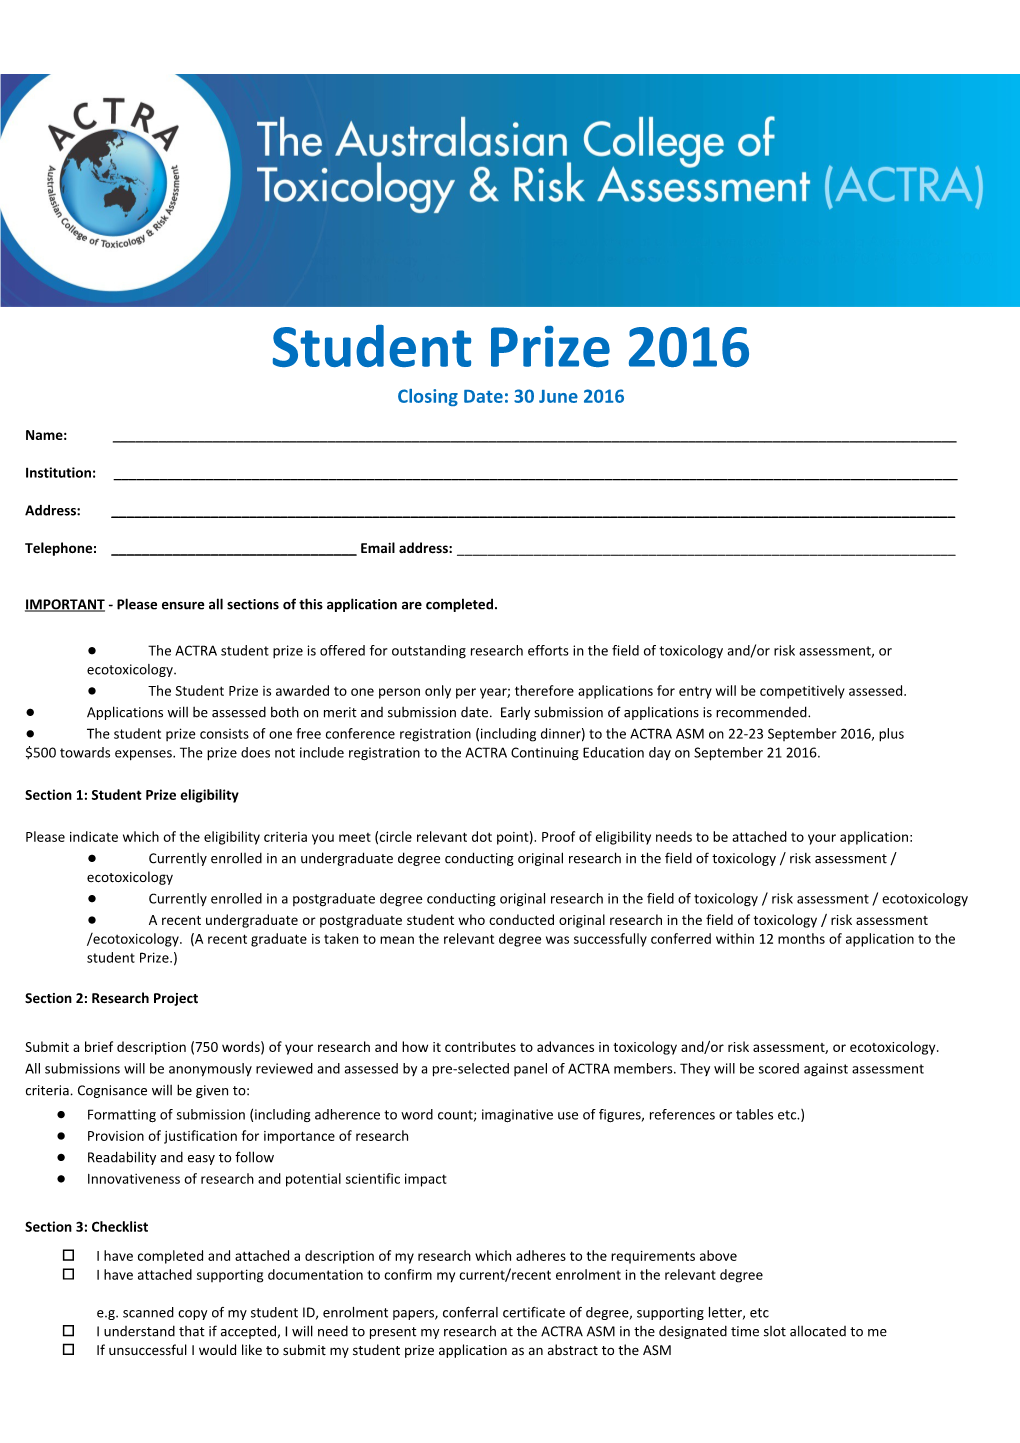 Student Prize 2016 Closing Date: 30 June 2016